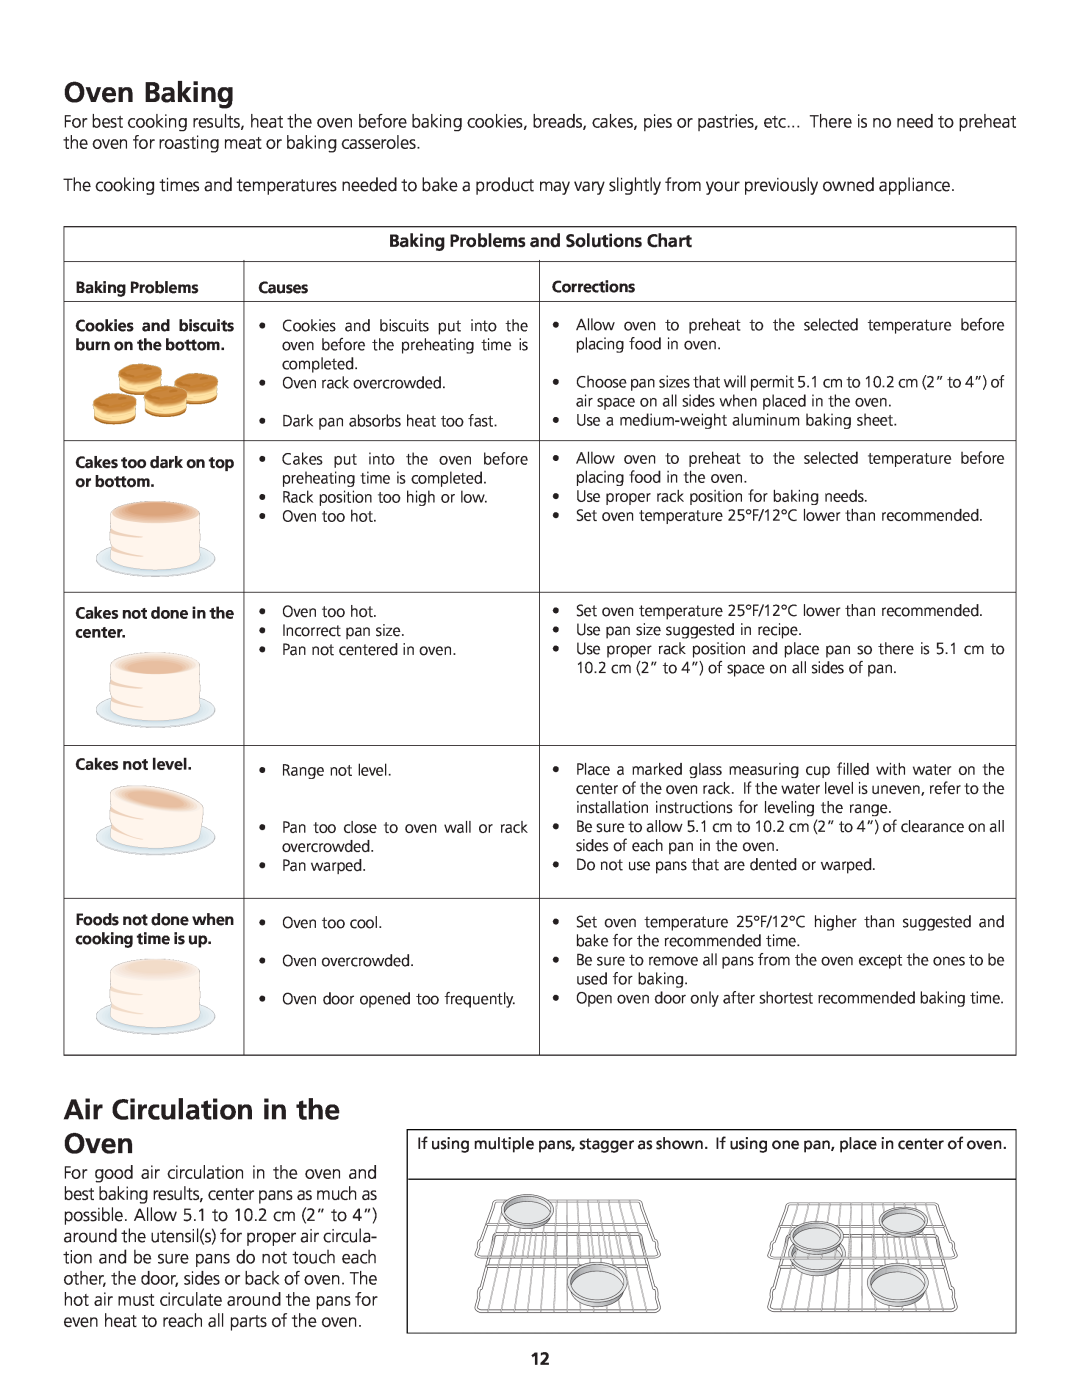 Frigidaire 318200869 manual Oven Baking, Air Circulation in the Oven, Baking Problems and Solutions Chart 